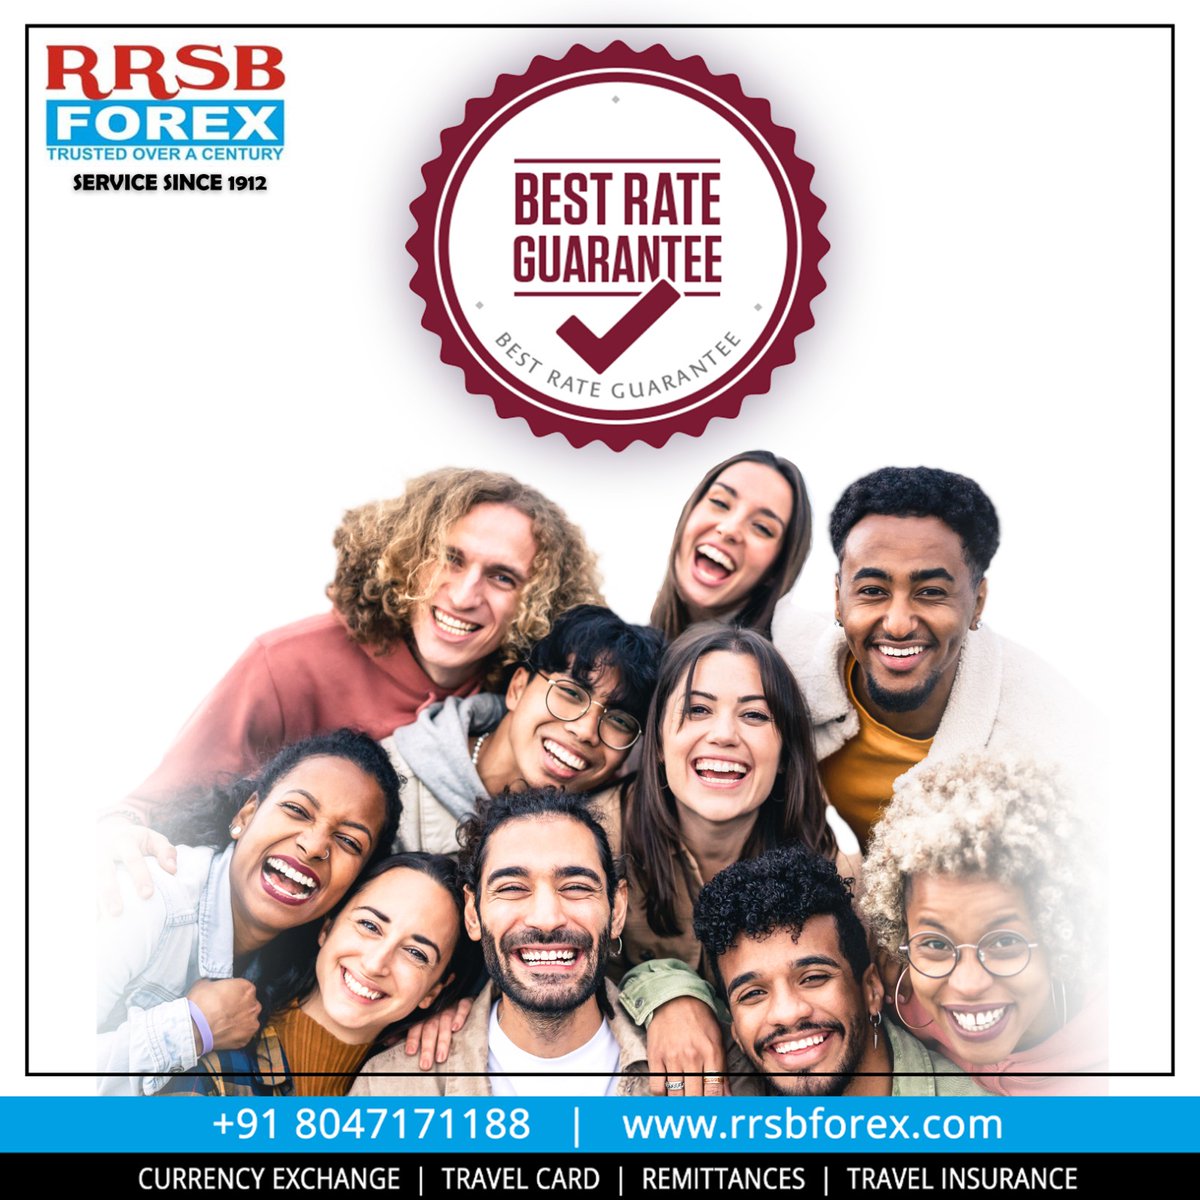 Experience excellence with RRSB Forex as we commit to delivering the best rates guaranteed across all our services. From currency exchange to remittances, trust us for unparalleled value and reliability.

For enquiries: +91 8047171188

#forex  #RRSBForex #UnlockingOpportunities